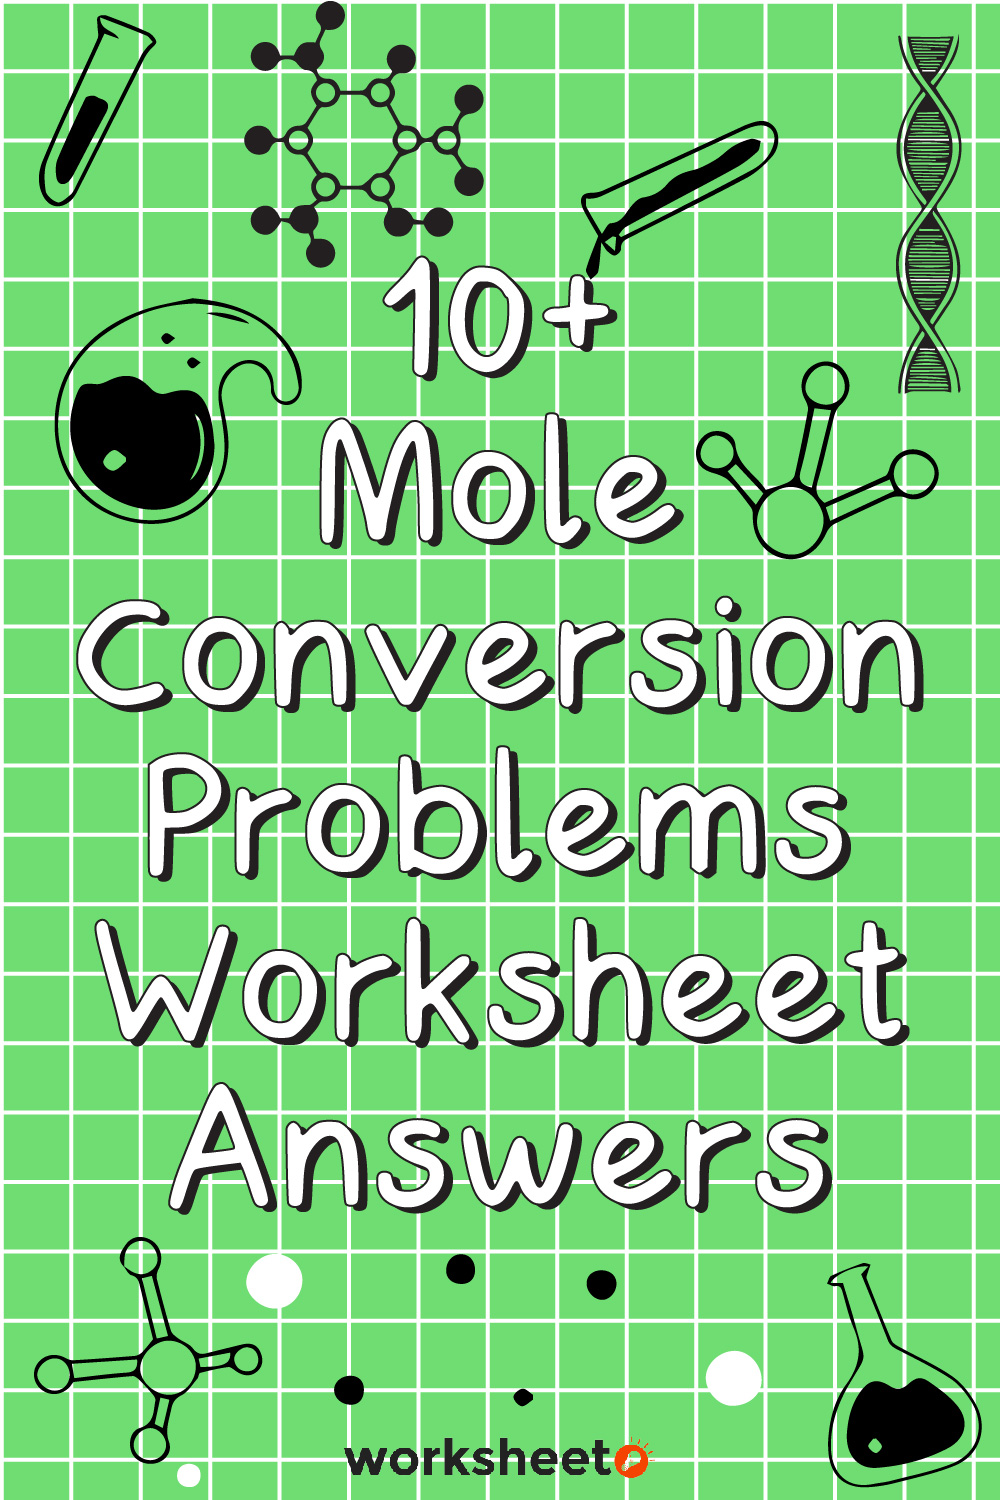 18 Images of Mole Conversion Problems Worksheet Answers